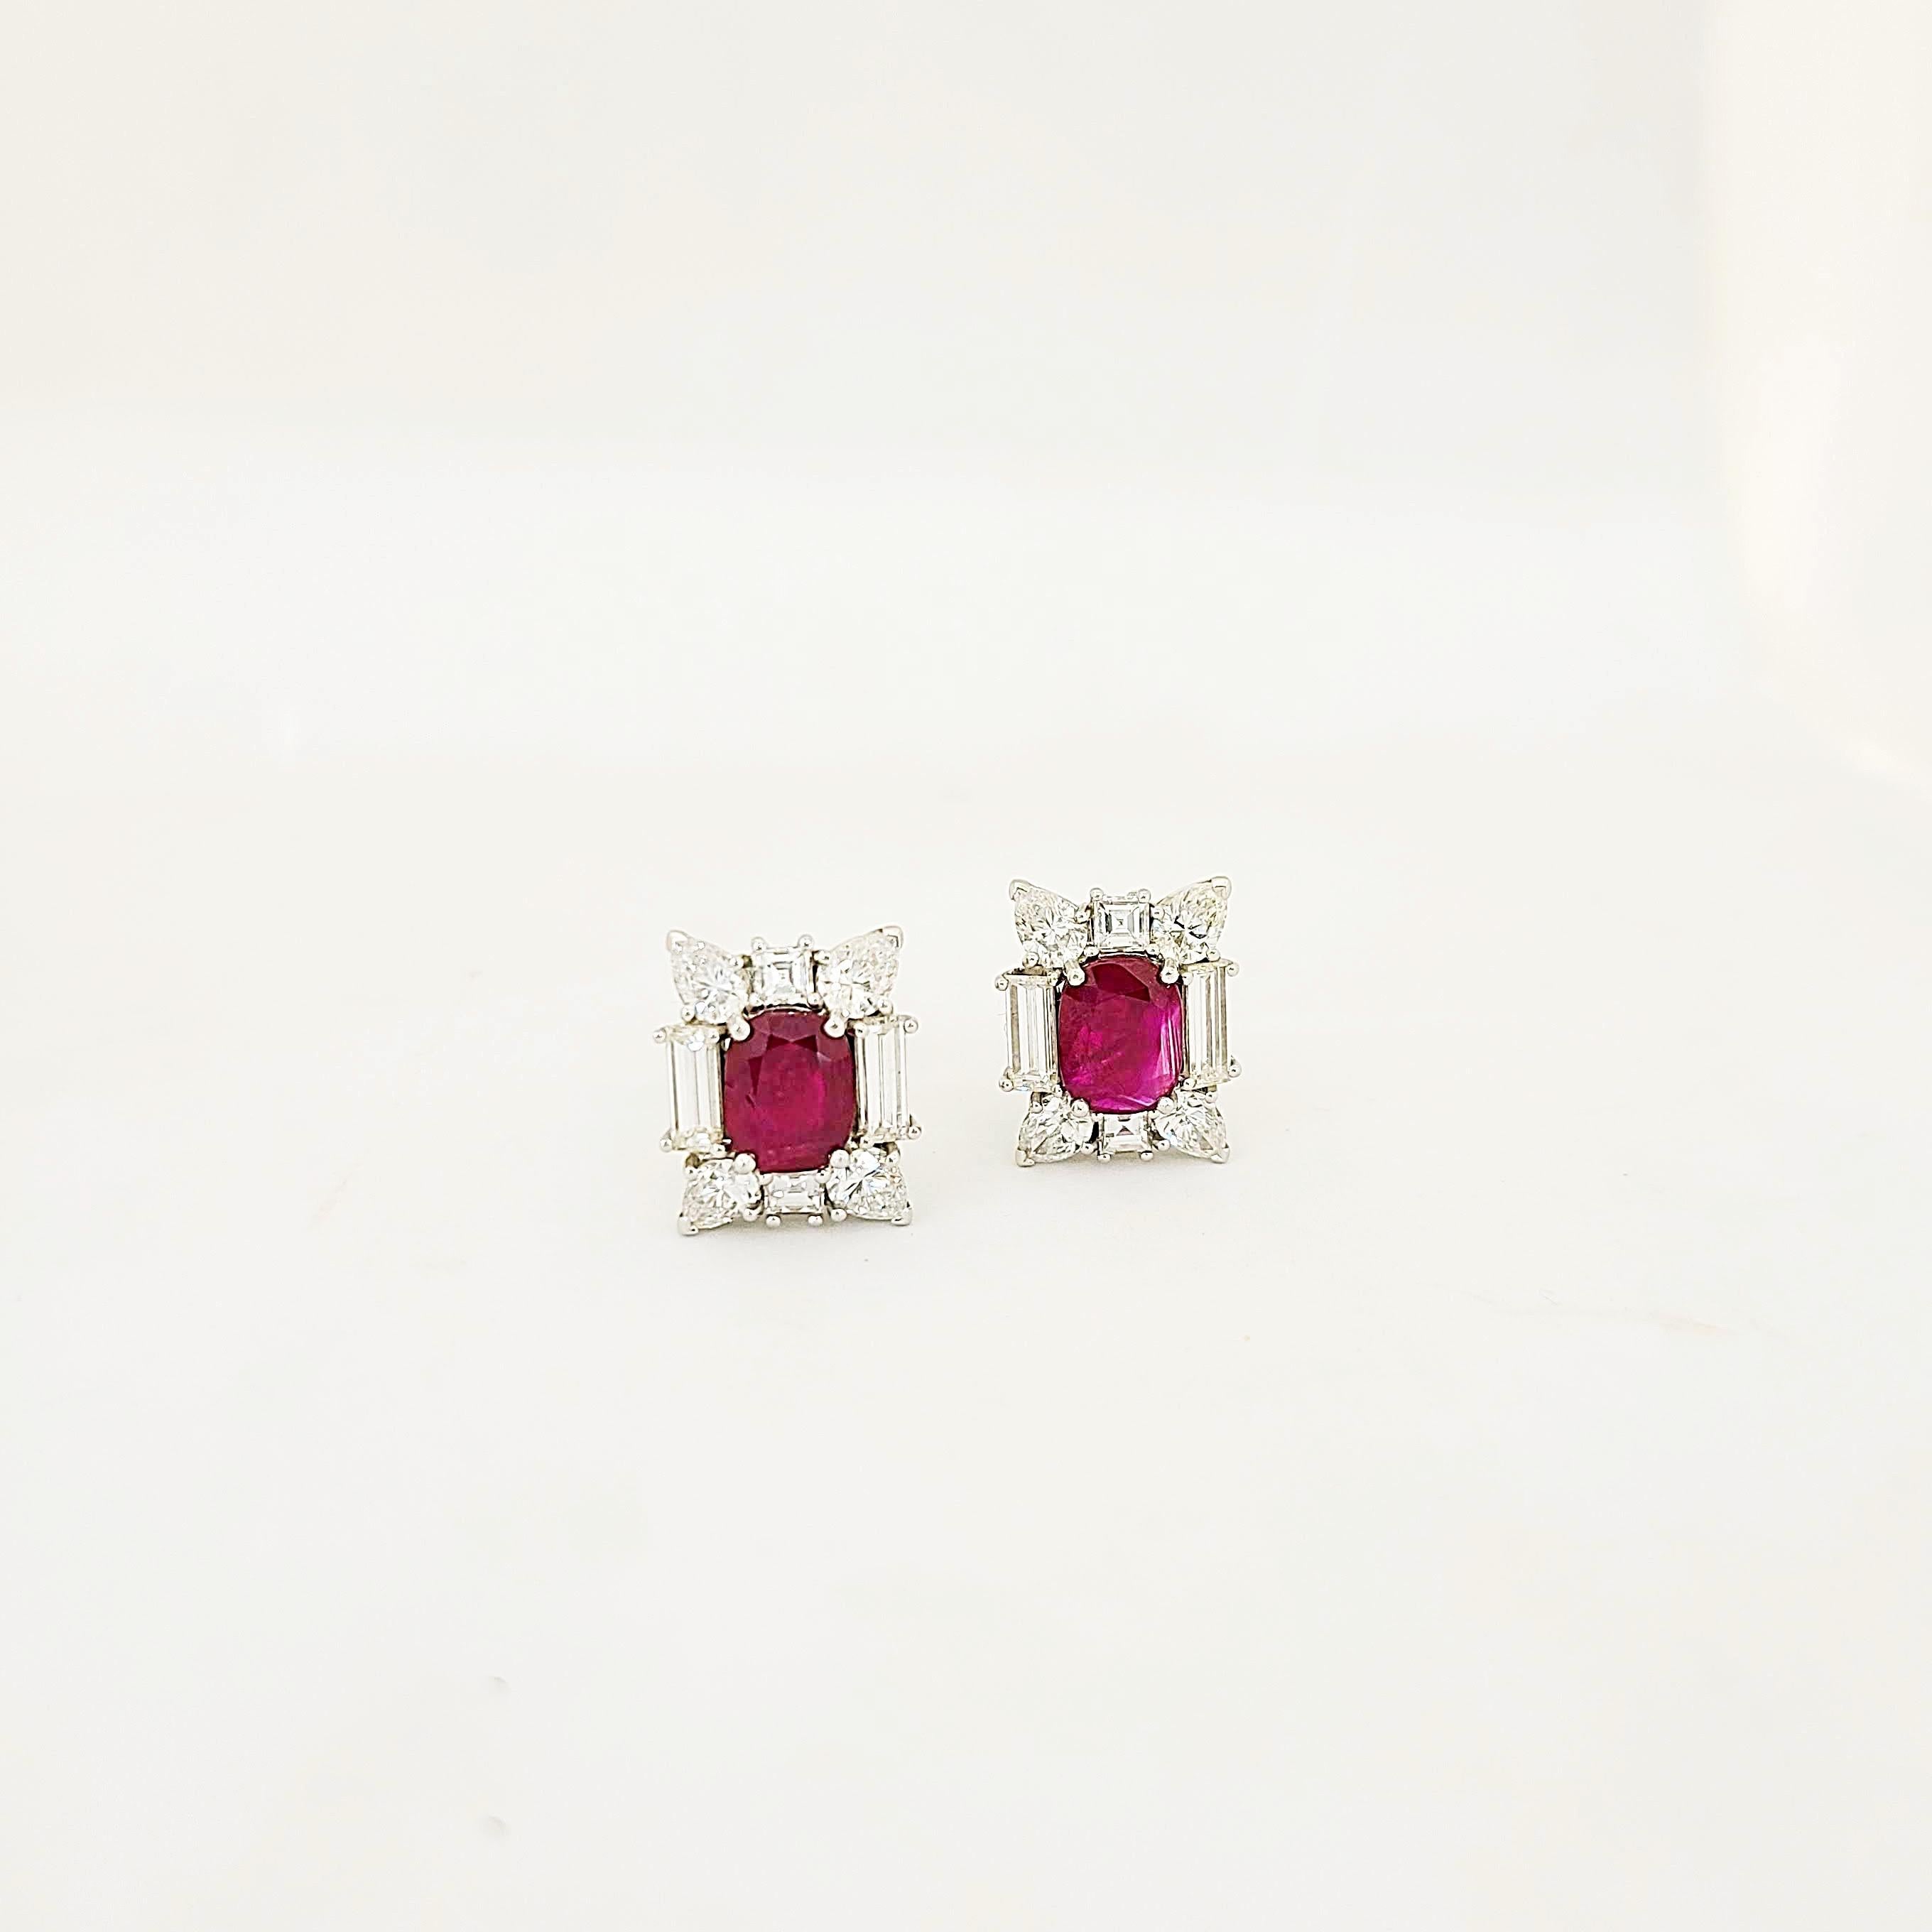 Contemporary Cellini 18KT White Gold 5.54 Carat Burmese Ruby and 5.14 Carat Diamond Earrings For Sale